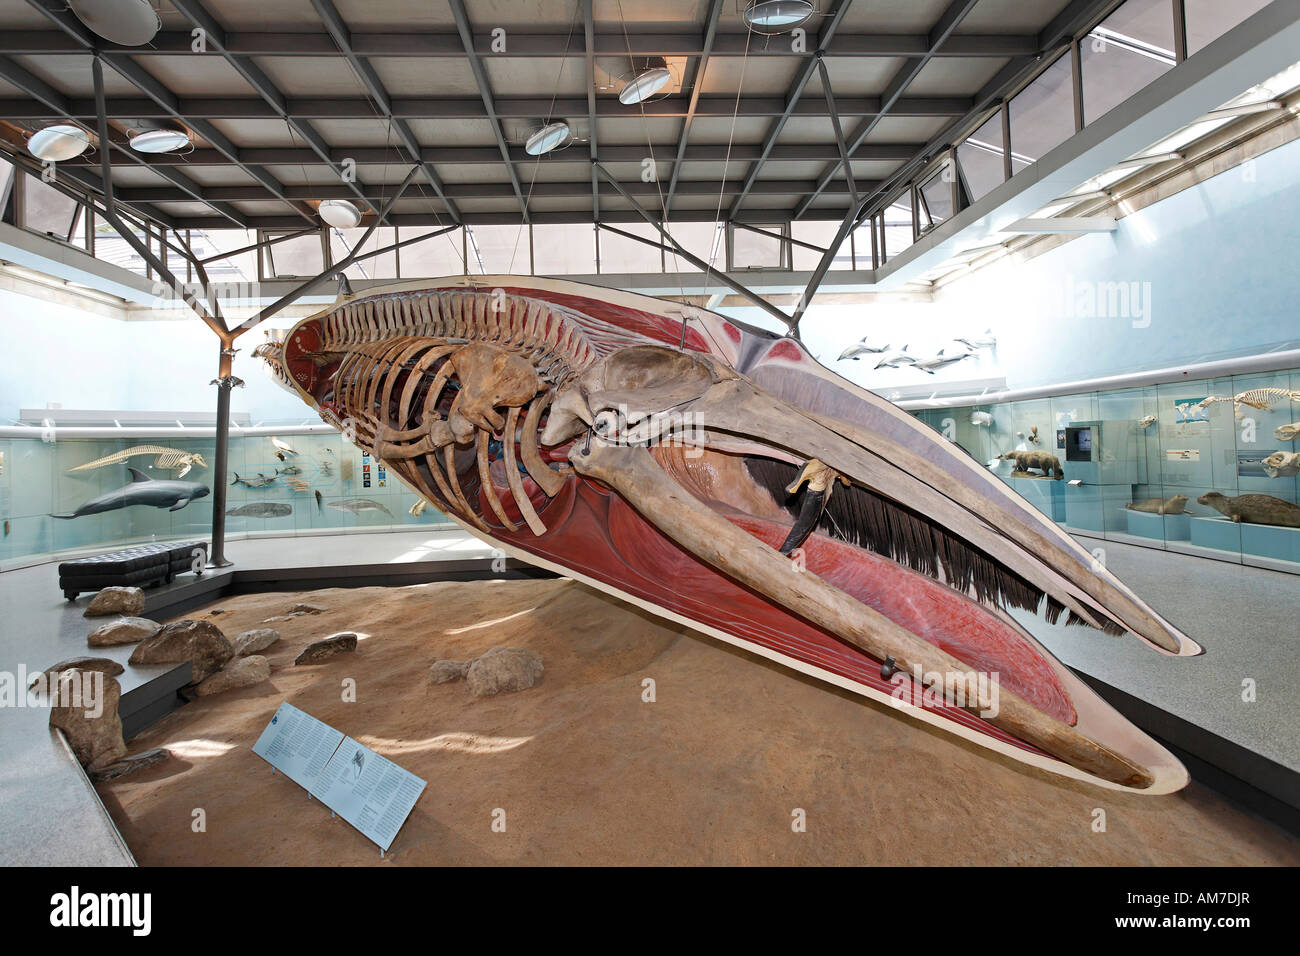 Reproduction of a whale, museum of natural history, castle Rosenstein, Stuttgart, Baden-Wuerttemberg, Germany Stock Photo